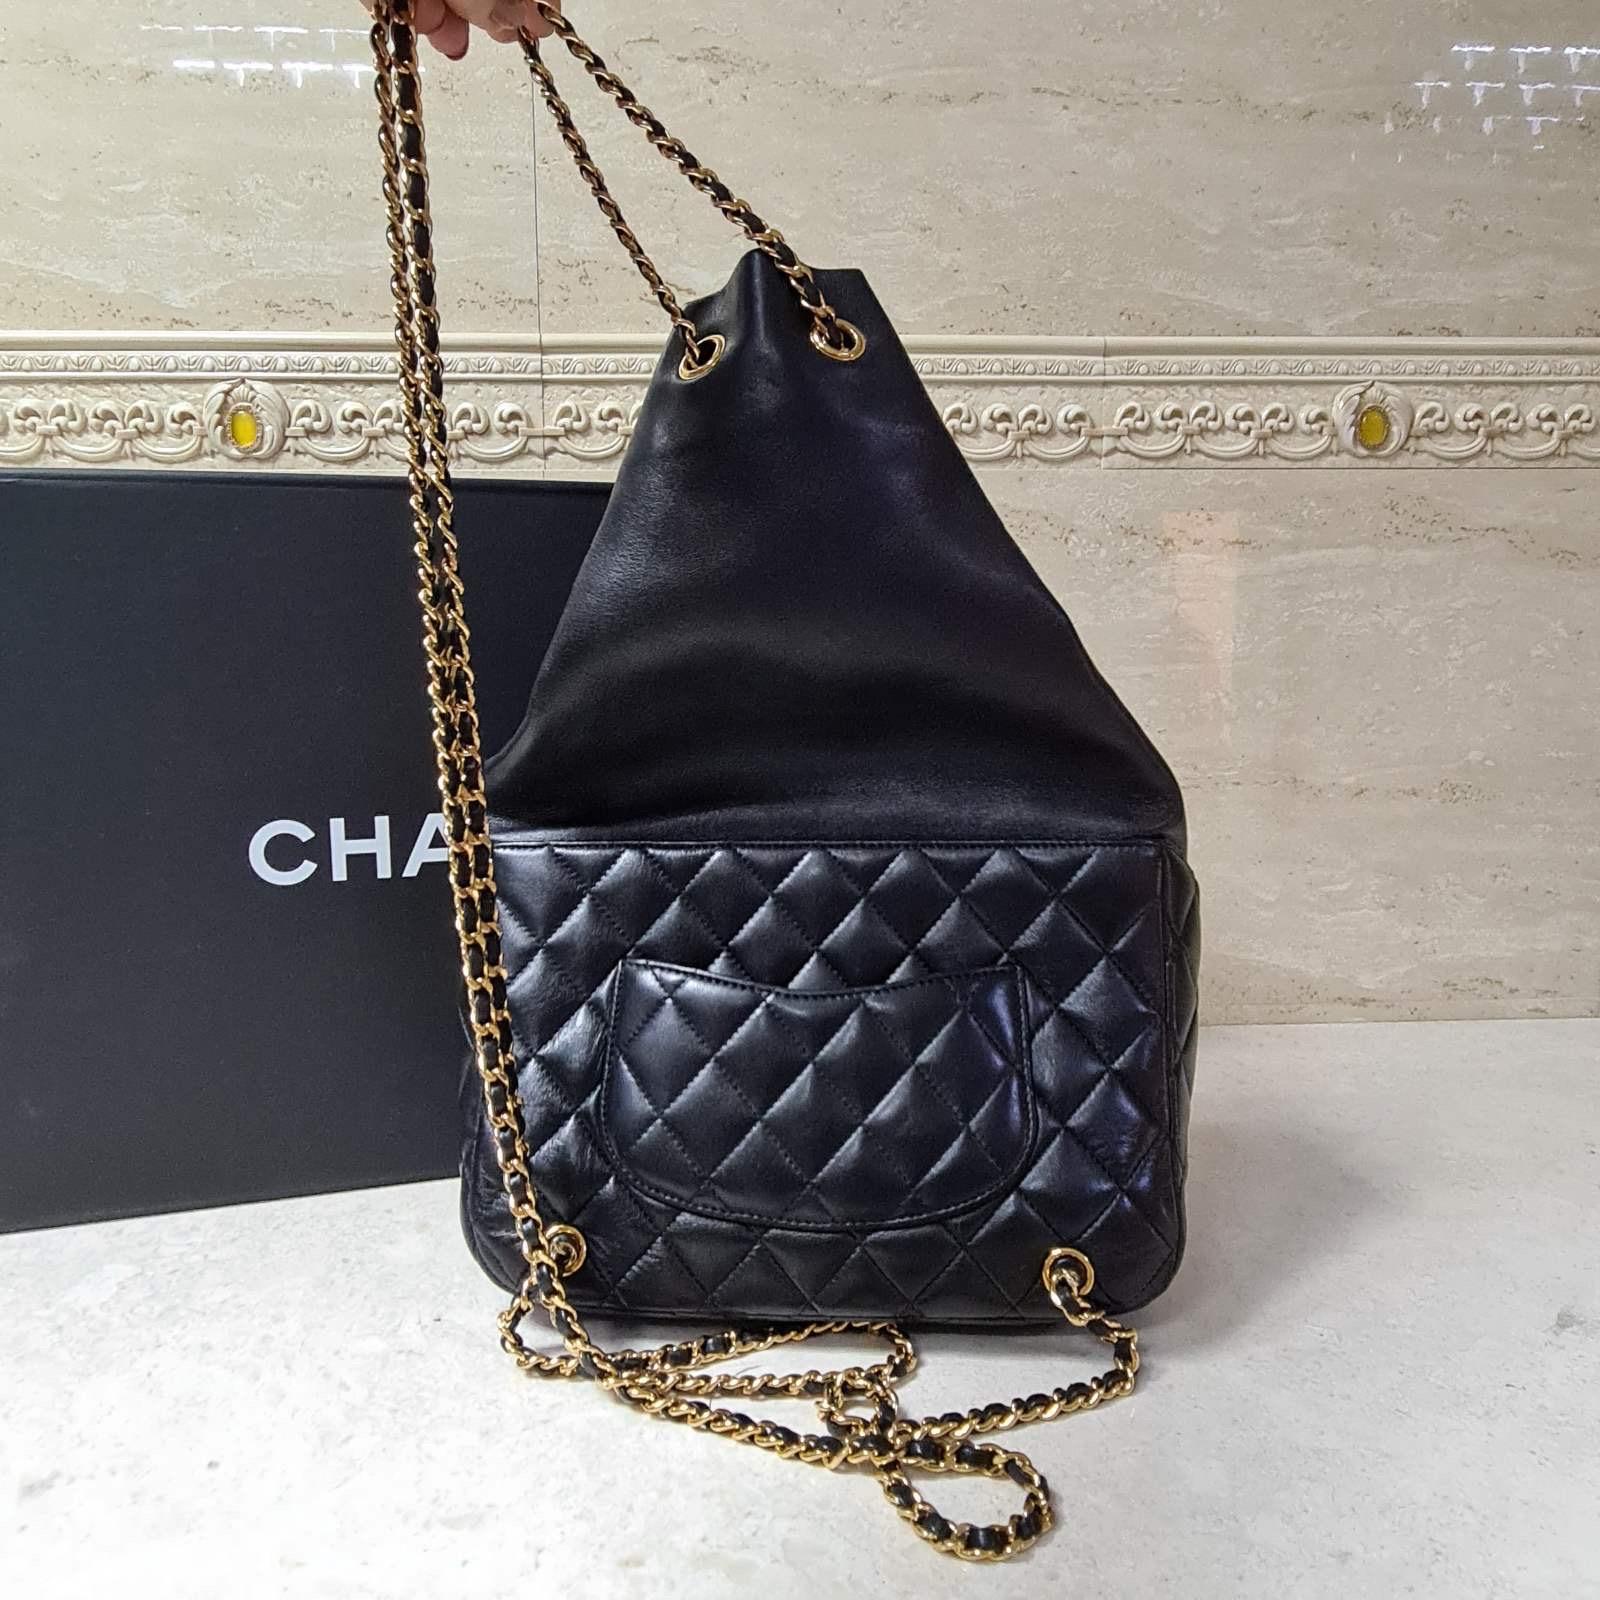 This Chanel Cruise 2015/2016 Seoul Lambskin Backpack has hardly been worn and is suited for any sophisticated collector’s wardrobe. 
The bag features the black signature quilt, golden hardware and comes in a dust bag.
Condition is very good.
For